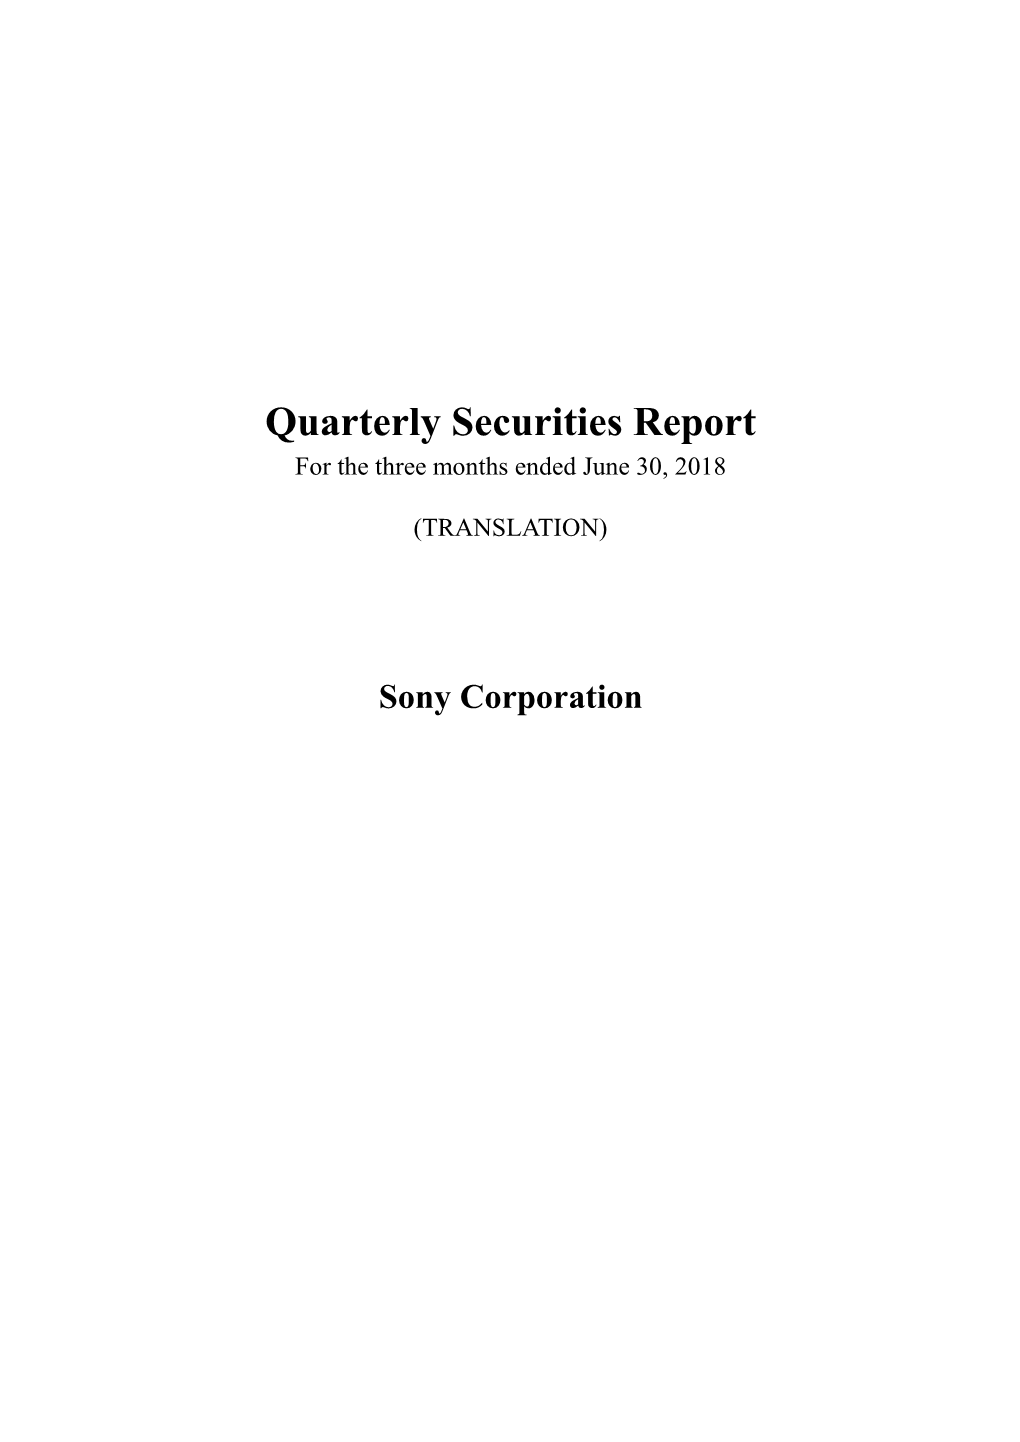 Quarterly Securities Report for the Three Months Ended June 30, 2018